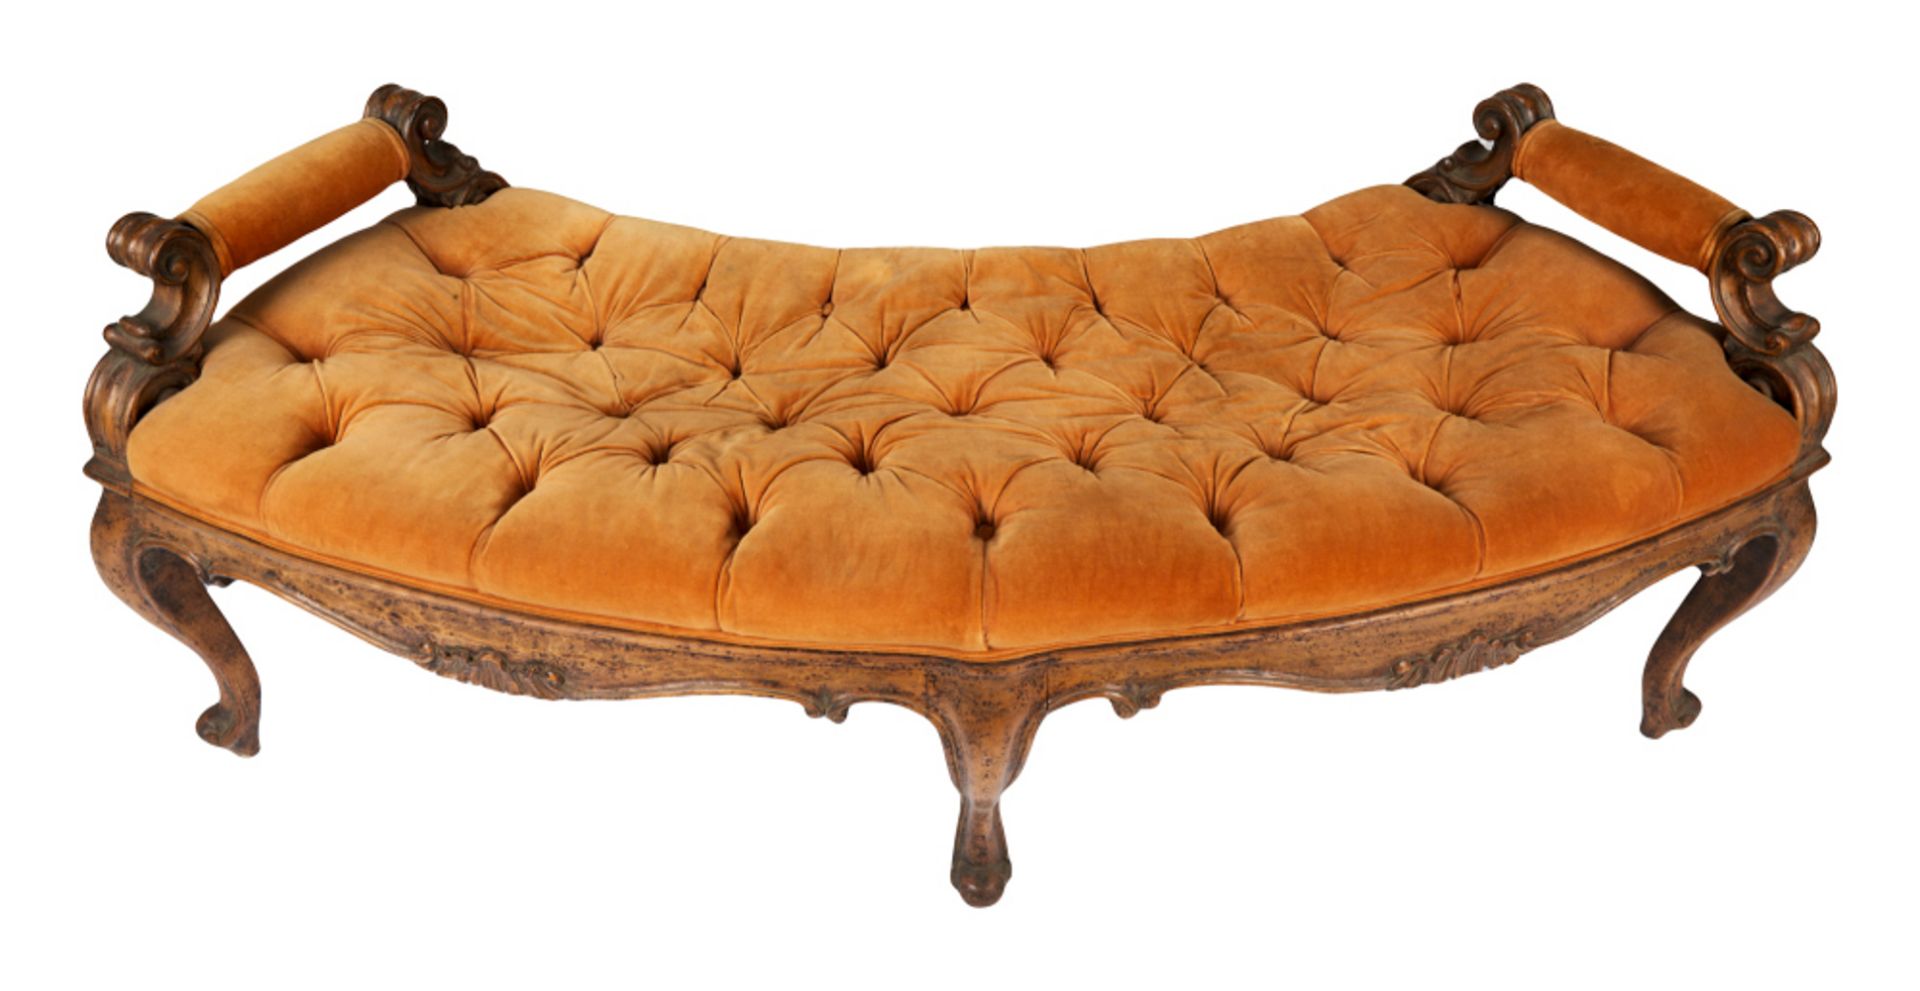 ROBERT EVANS | UPHOLSTERED CURVED BENCH - Image 14 of 18